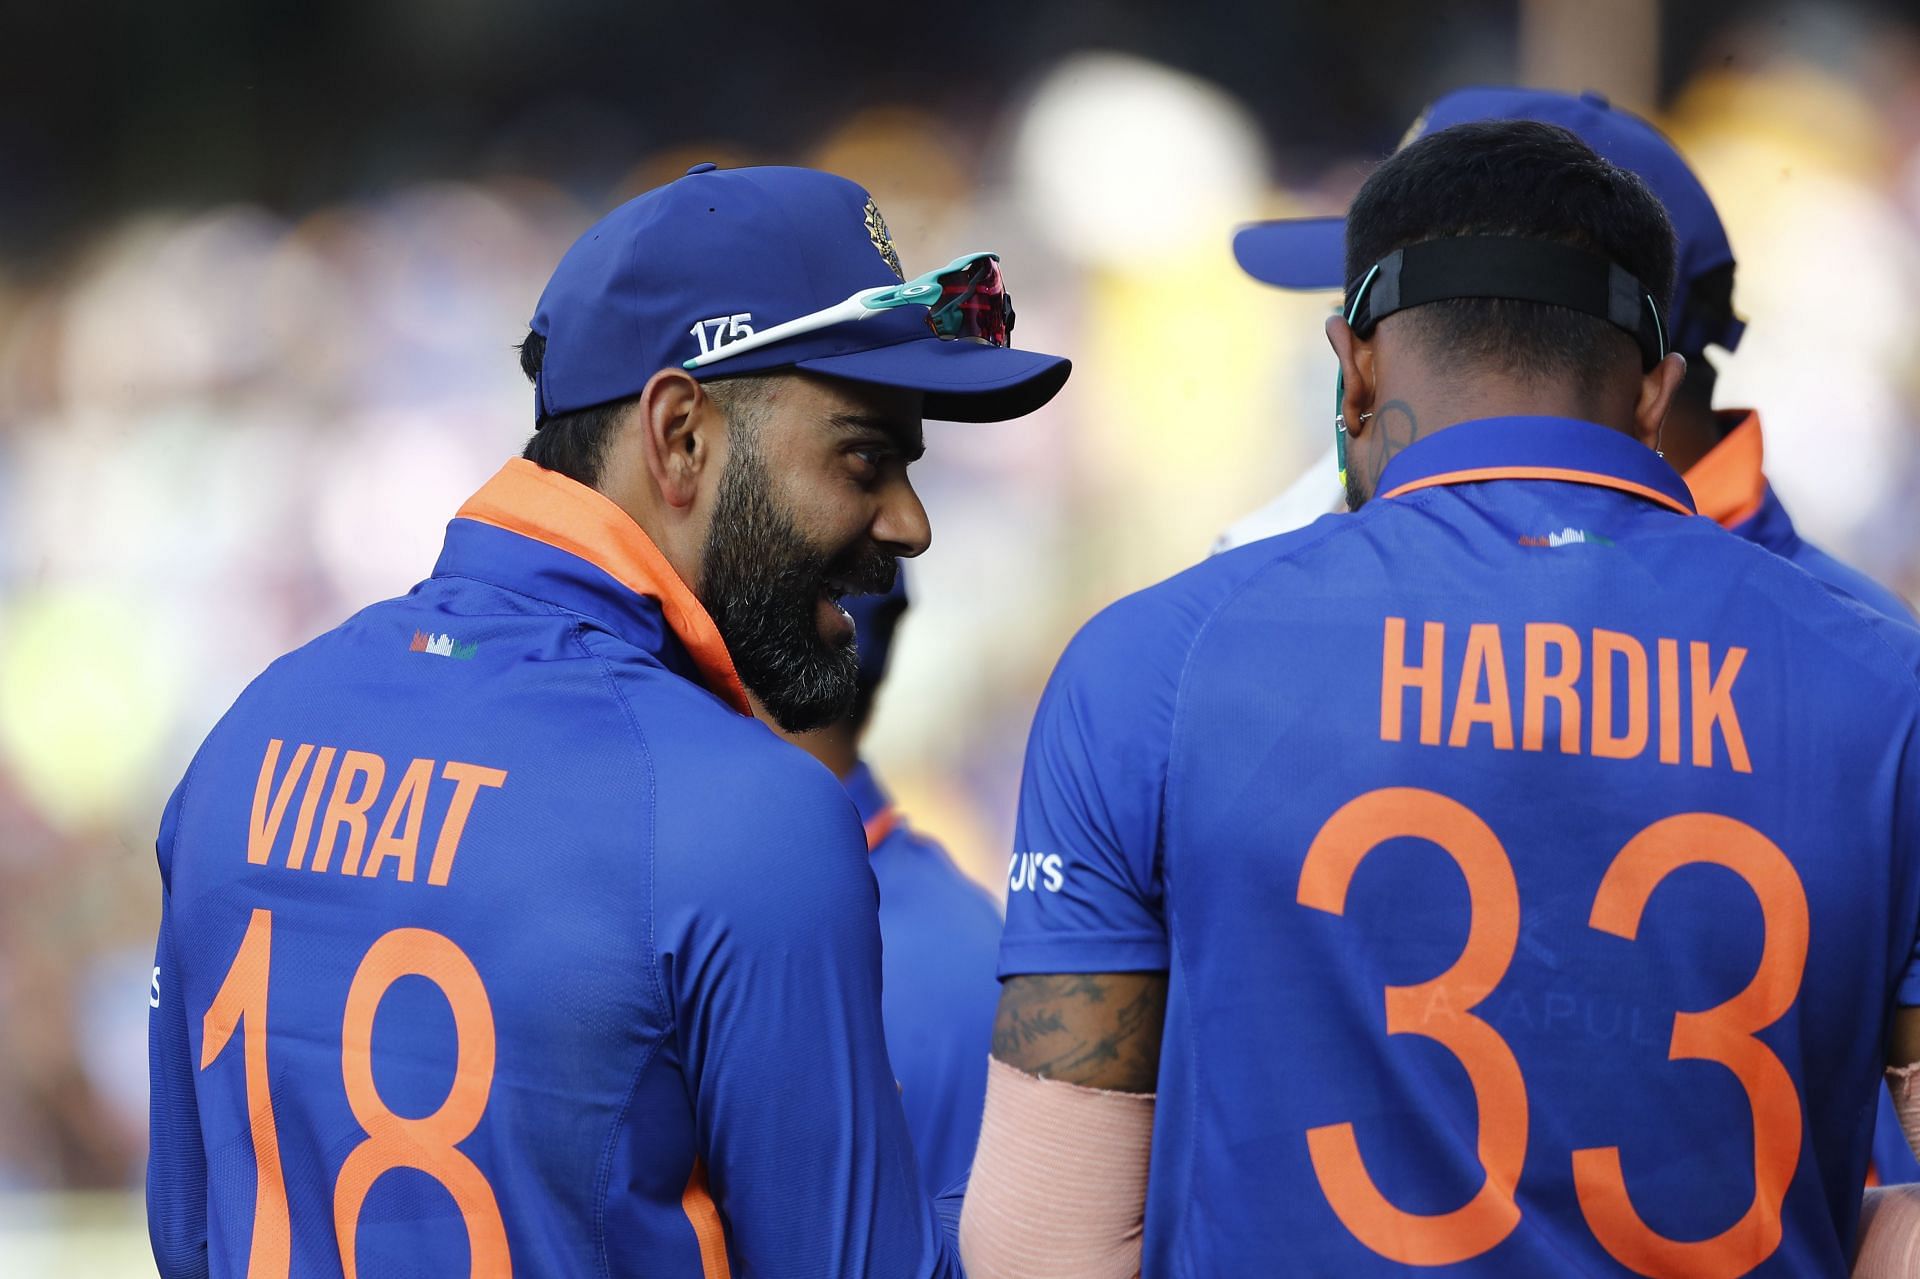 India's predicted playing XI for the 3rd ODI vs Australia